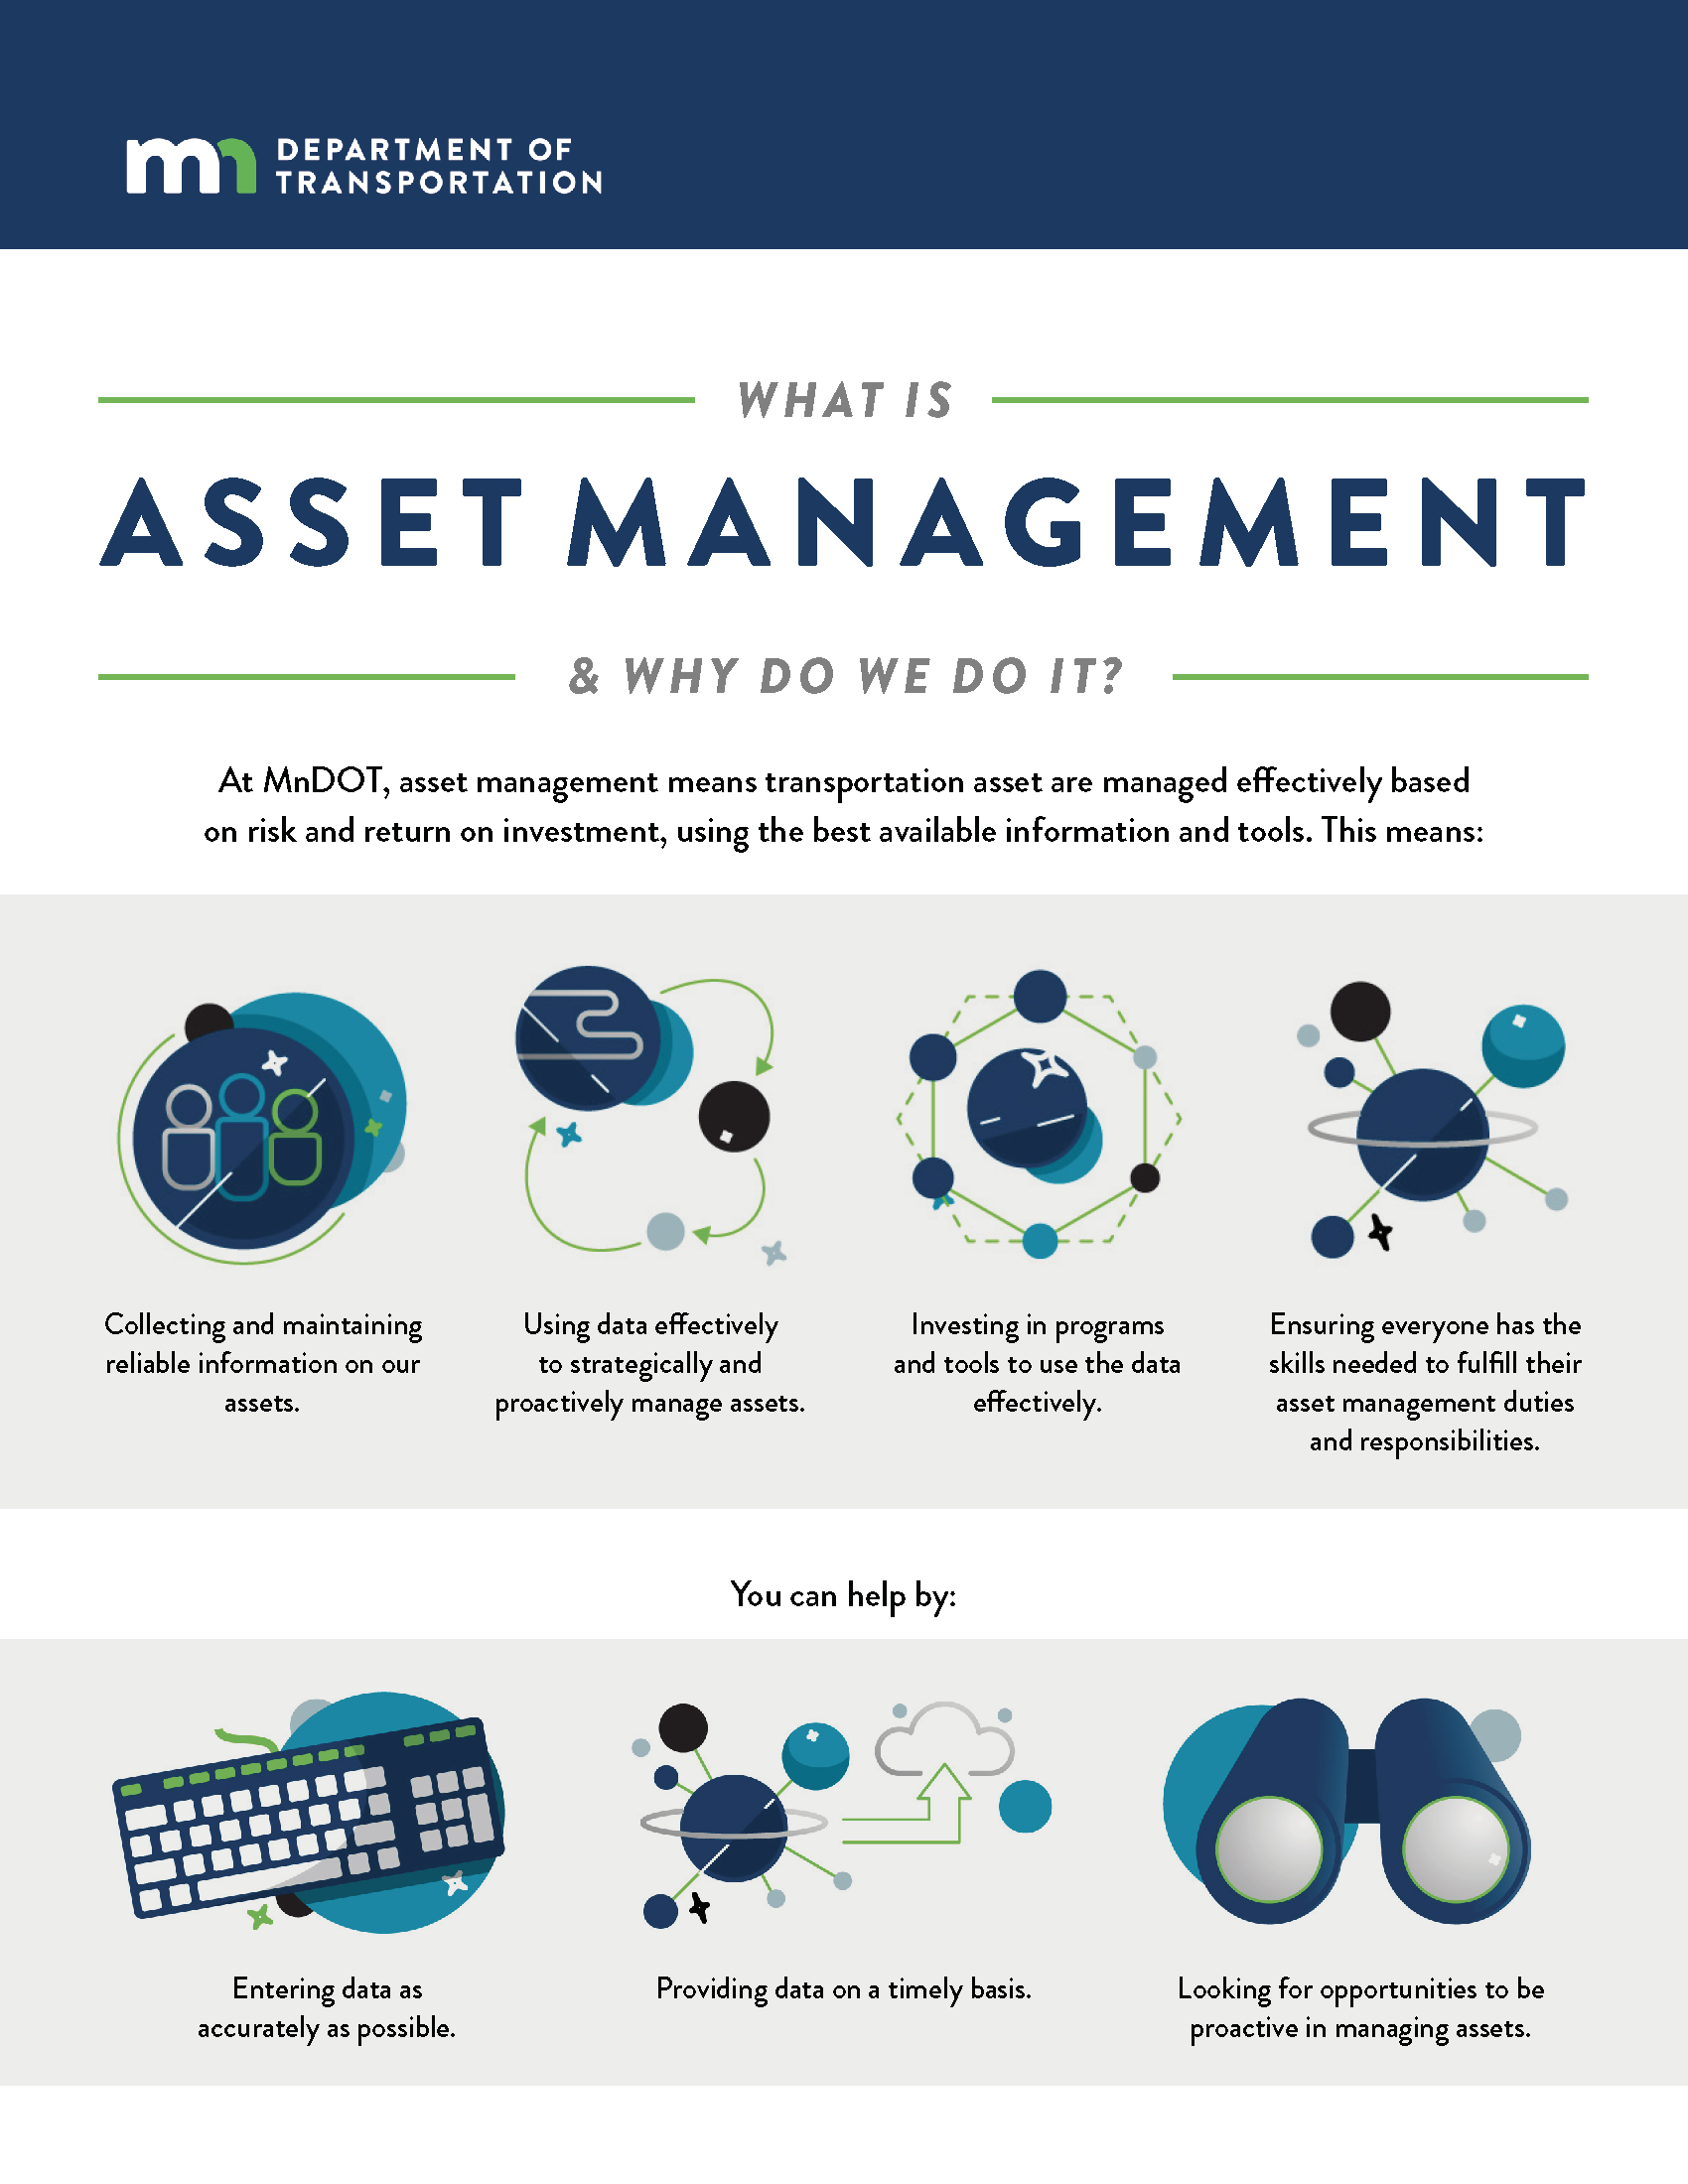 What Is Asset Management (flyer)